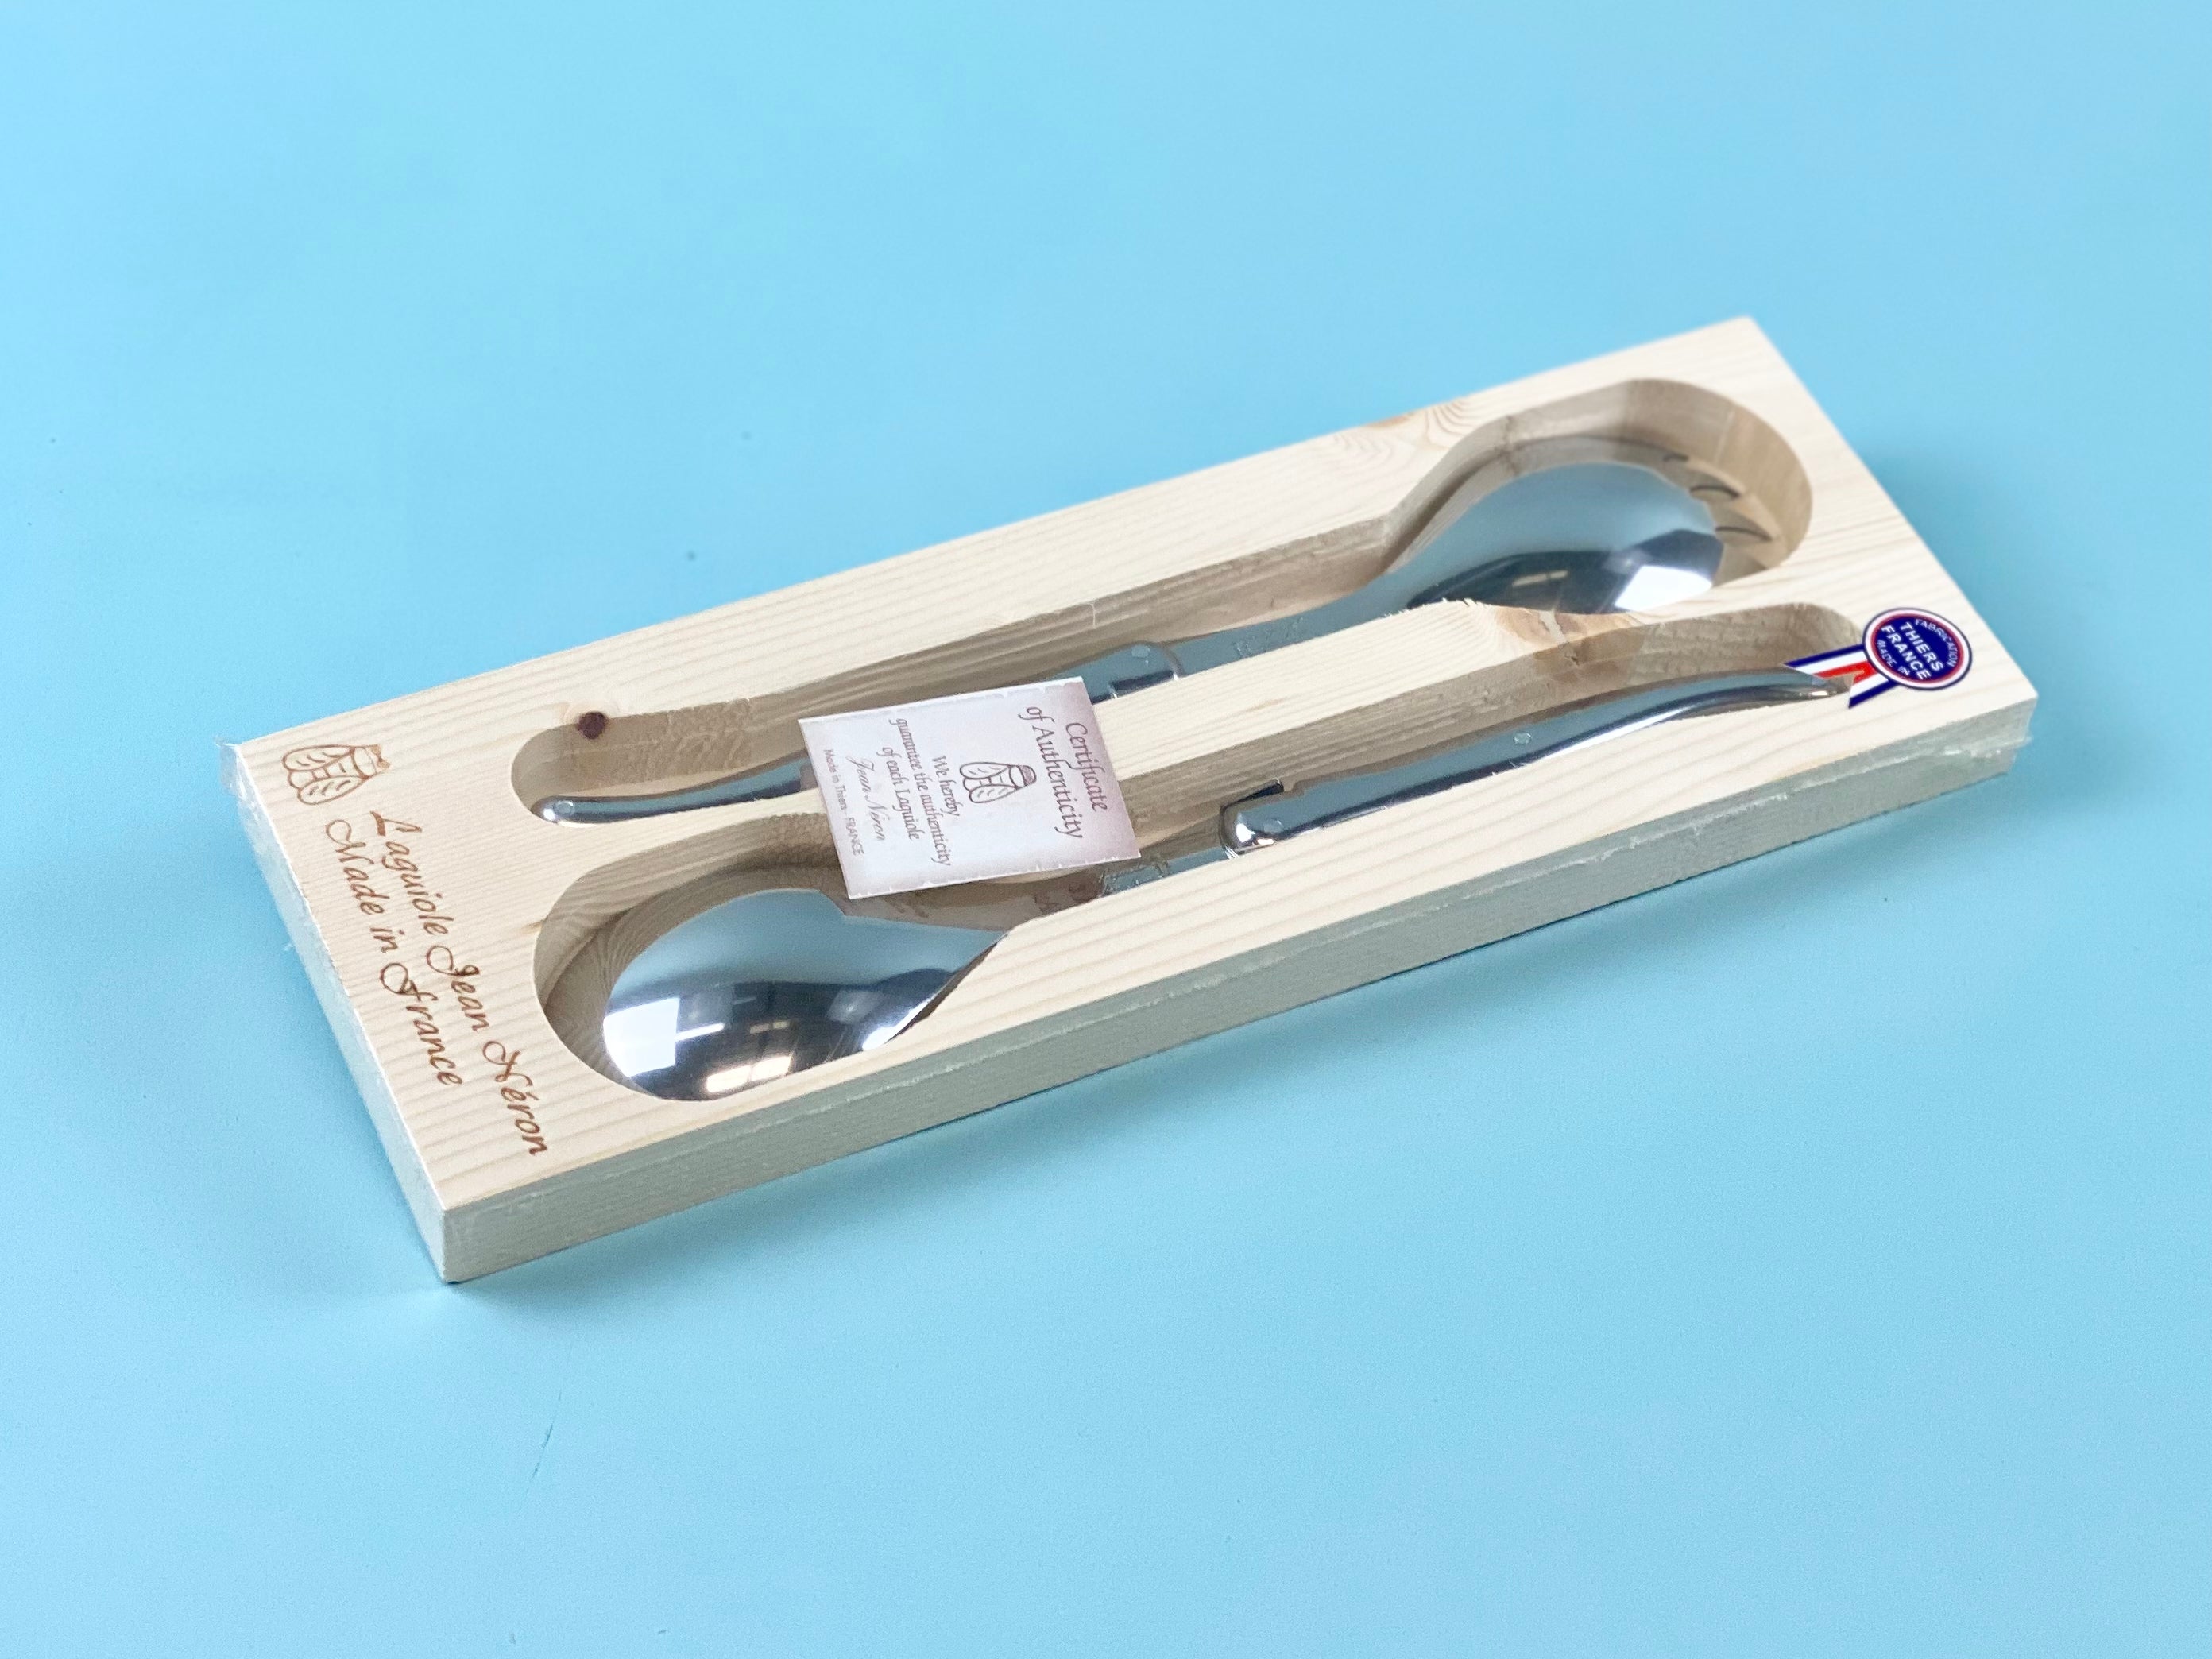 Laguiole Platine Salad Serving Set Stainless Steel in Wood Box (Set of 2) Cutlery Set Laguiole Brand_Laguiole Cheese Sets Kitchen_Dinnerware Laguiole Loose Mini Rainbow Utensils Serveware NR790123549PSS